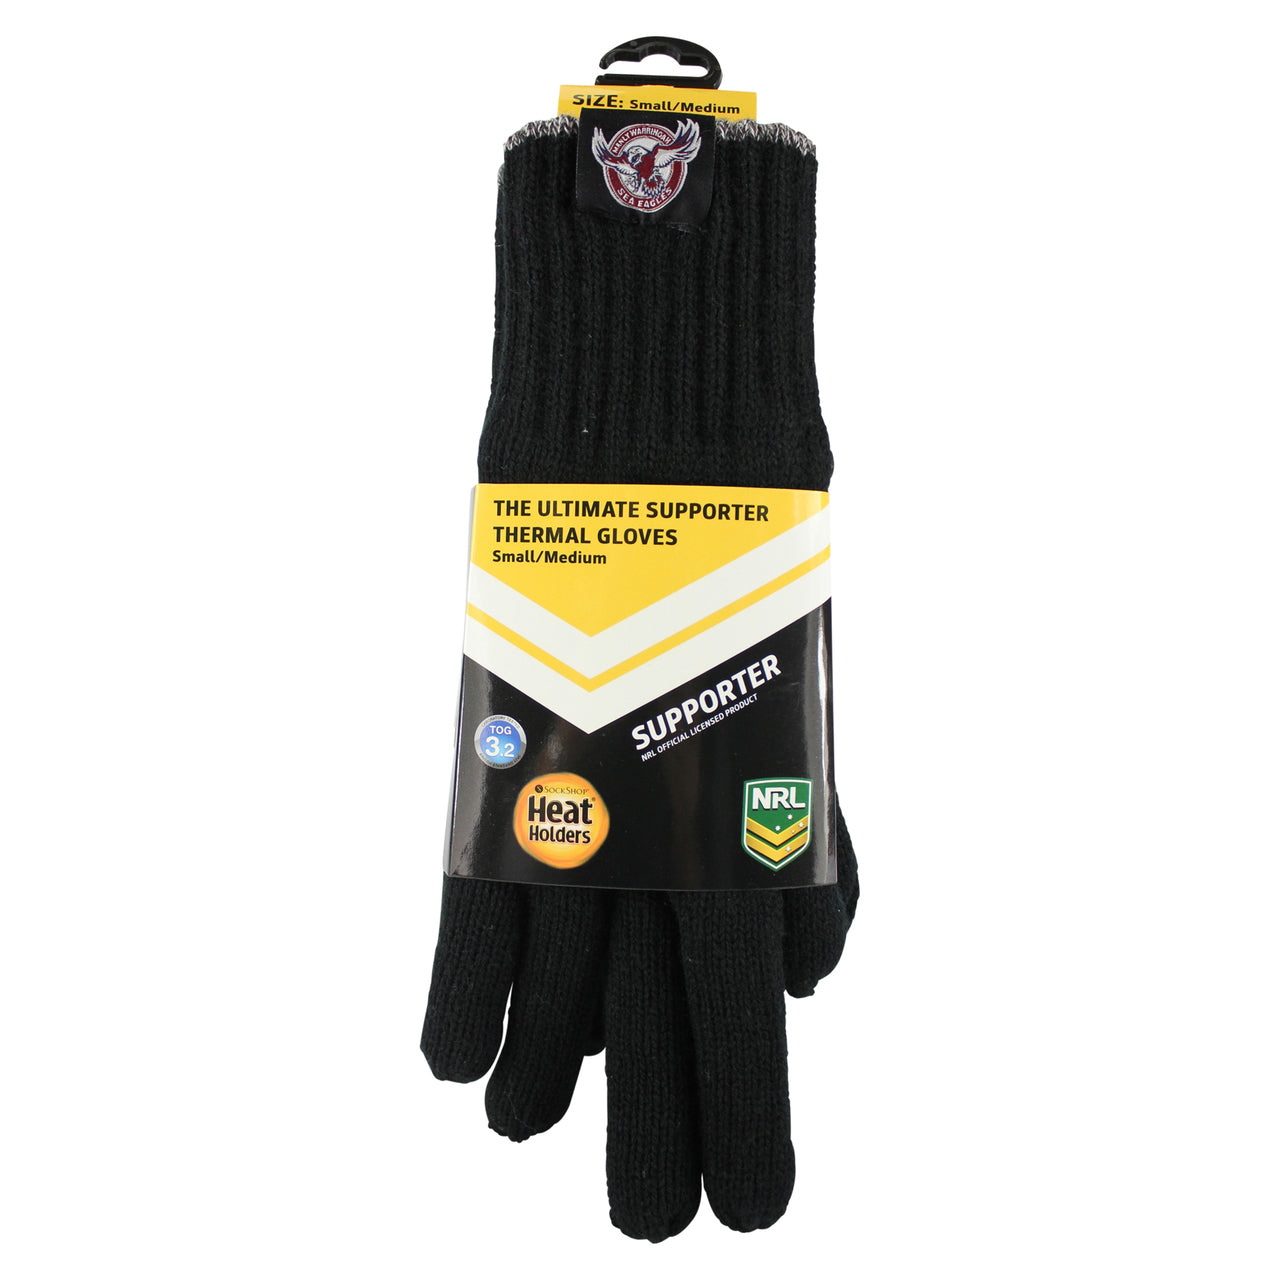 NRL Heat Holders Thermal Gloves Manly Sea Eagles